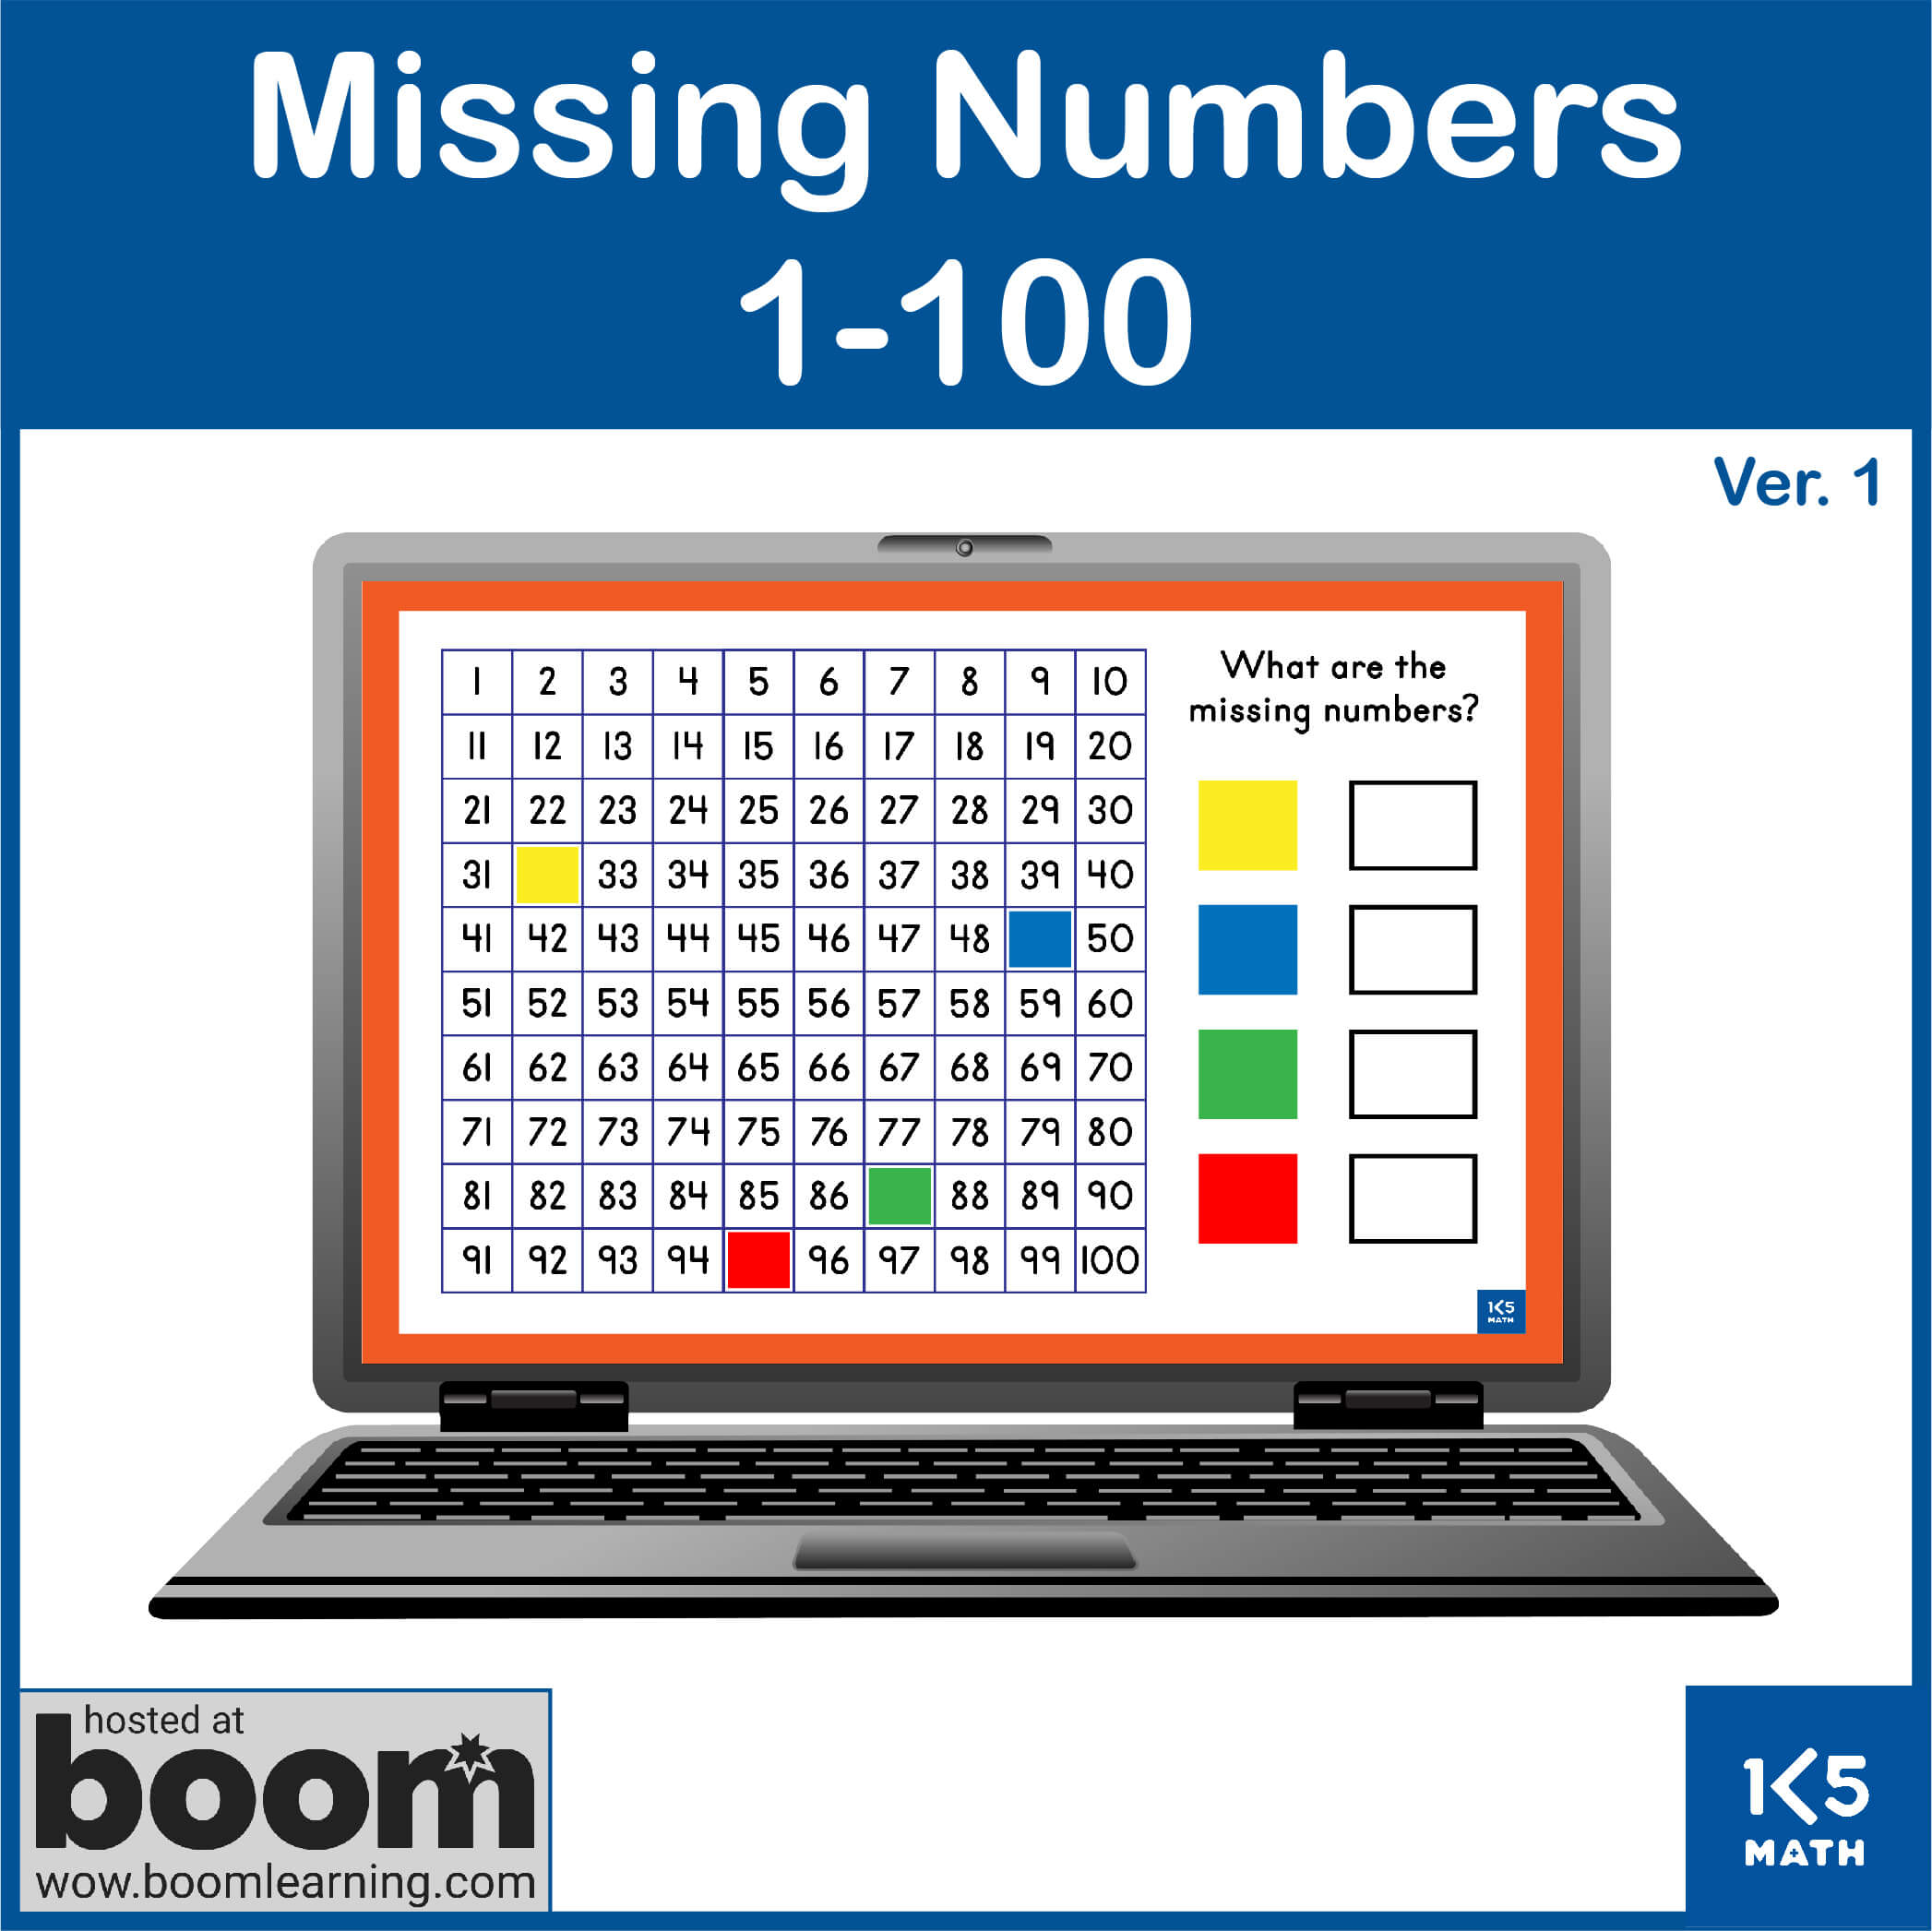 Boom Cards: Missing Numbers 1-100 Ver.1